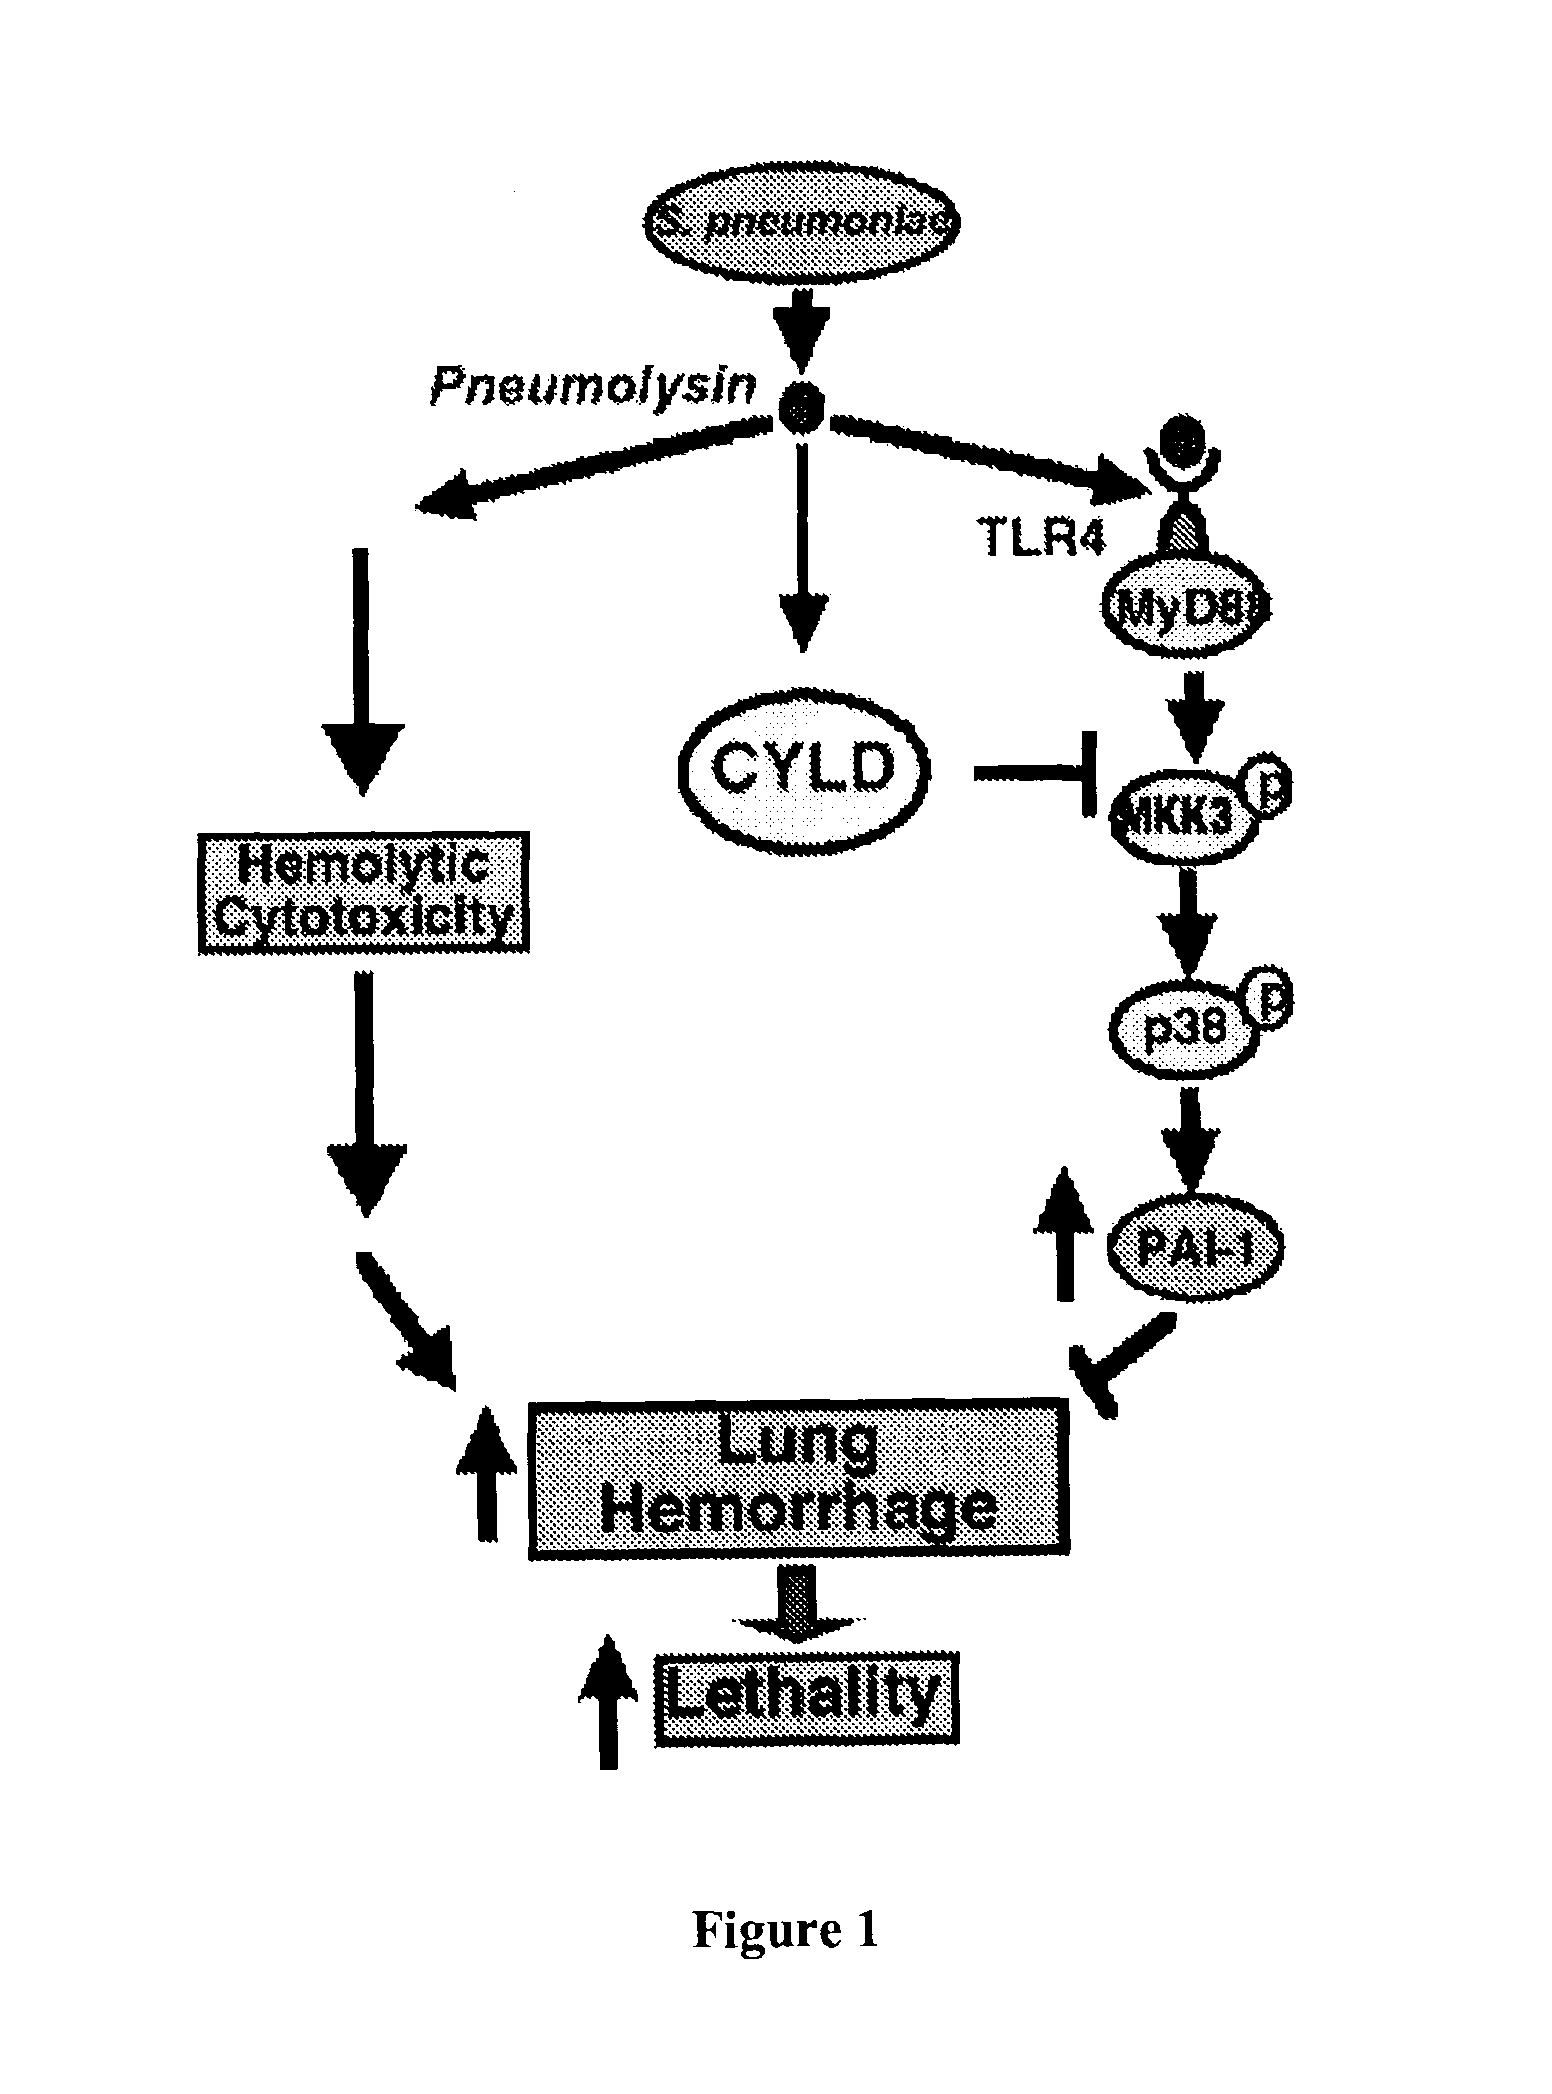 Methods for the treatment or prevention of hemorrhagic conditions